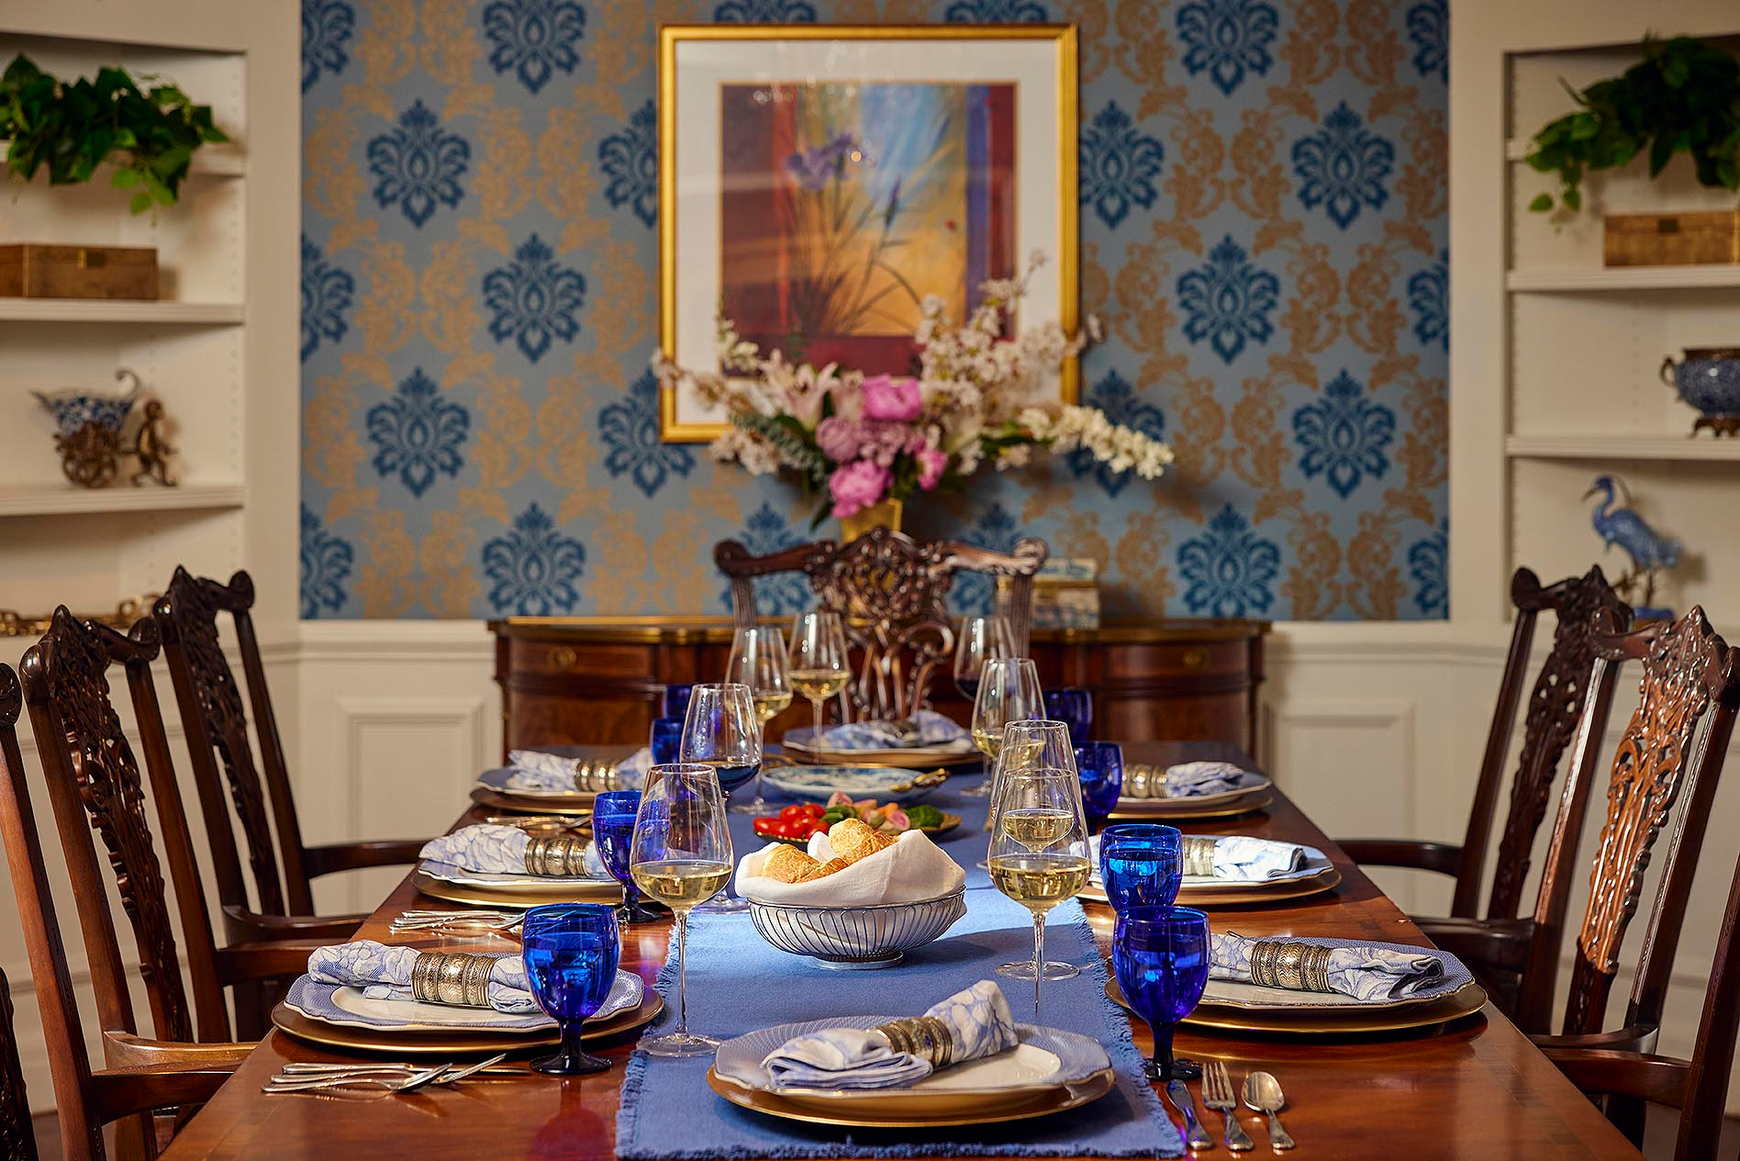 Host a dinner for family and friends in the private dining room